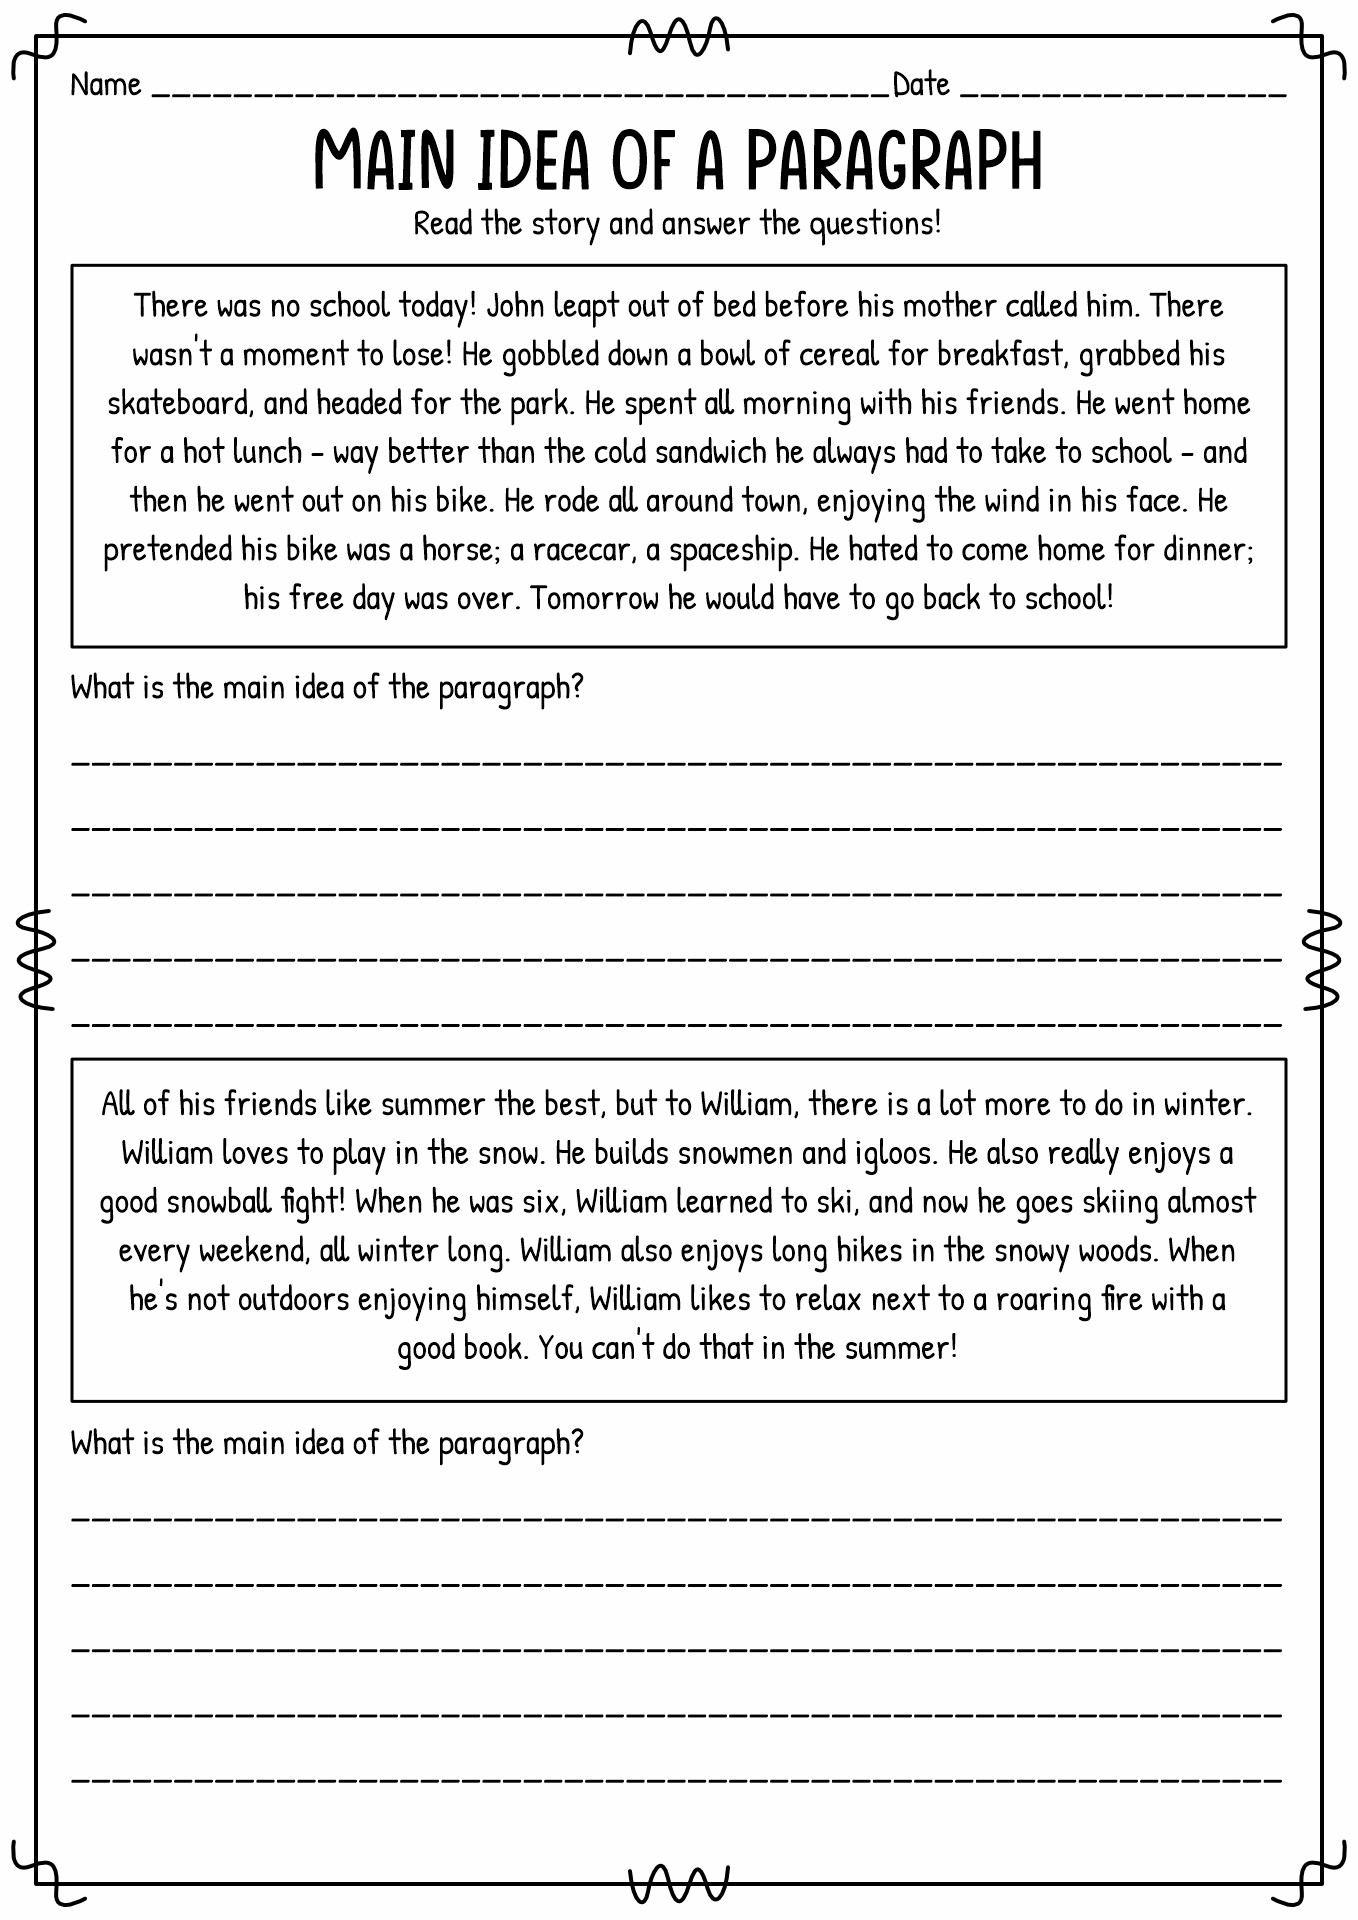 14 Best Images of Main Idea Worksheets Grade 5 Main Idea and Details